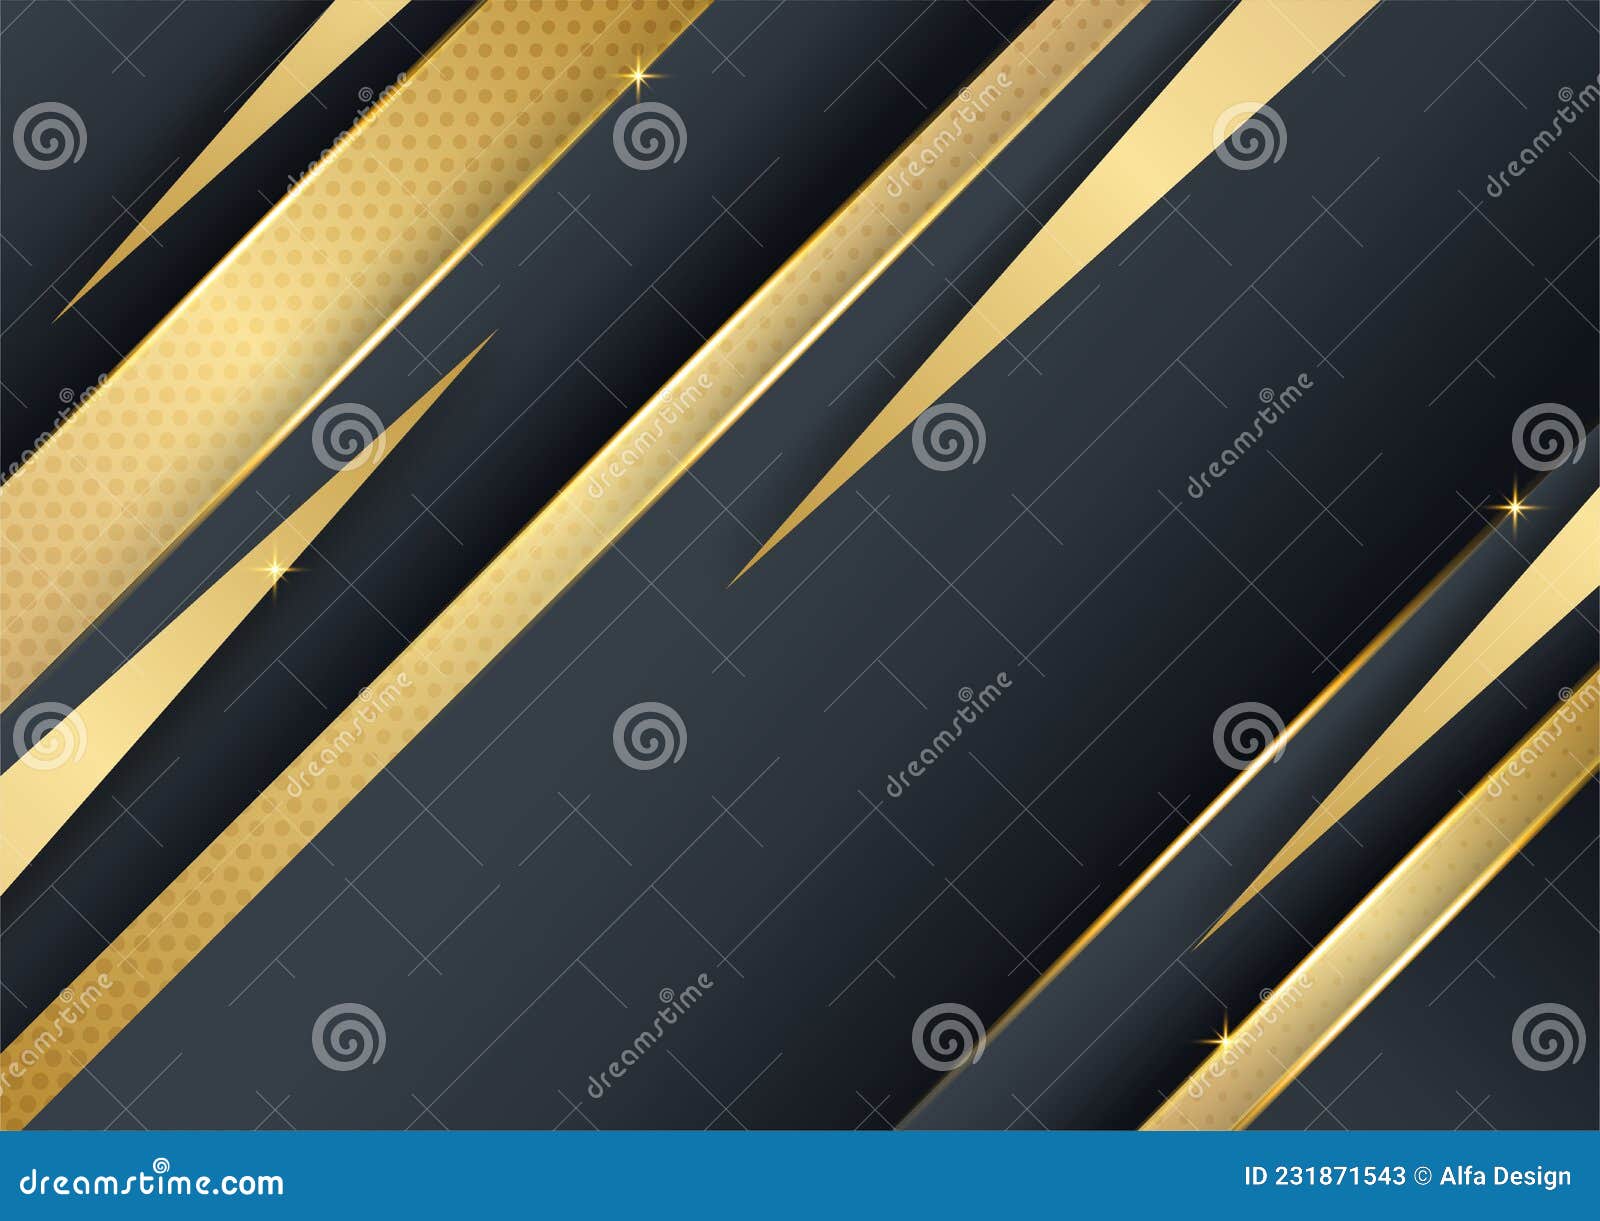 Black Gold Background. Abstract Black And Gold Lines Wallpaper